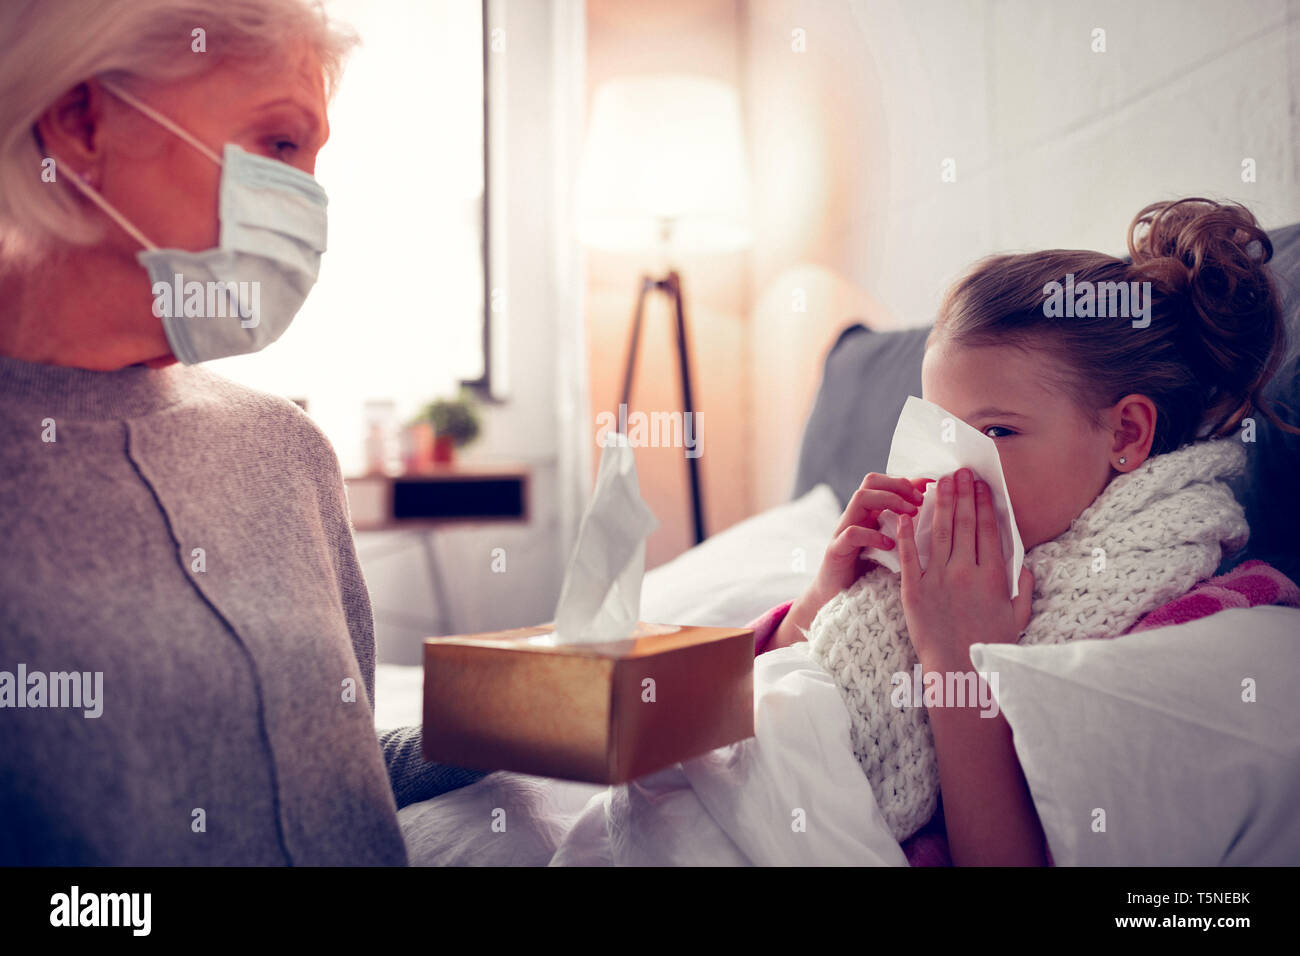 Granny giving granddaughter with running nose some napkins Stock Photo